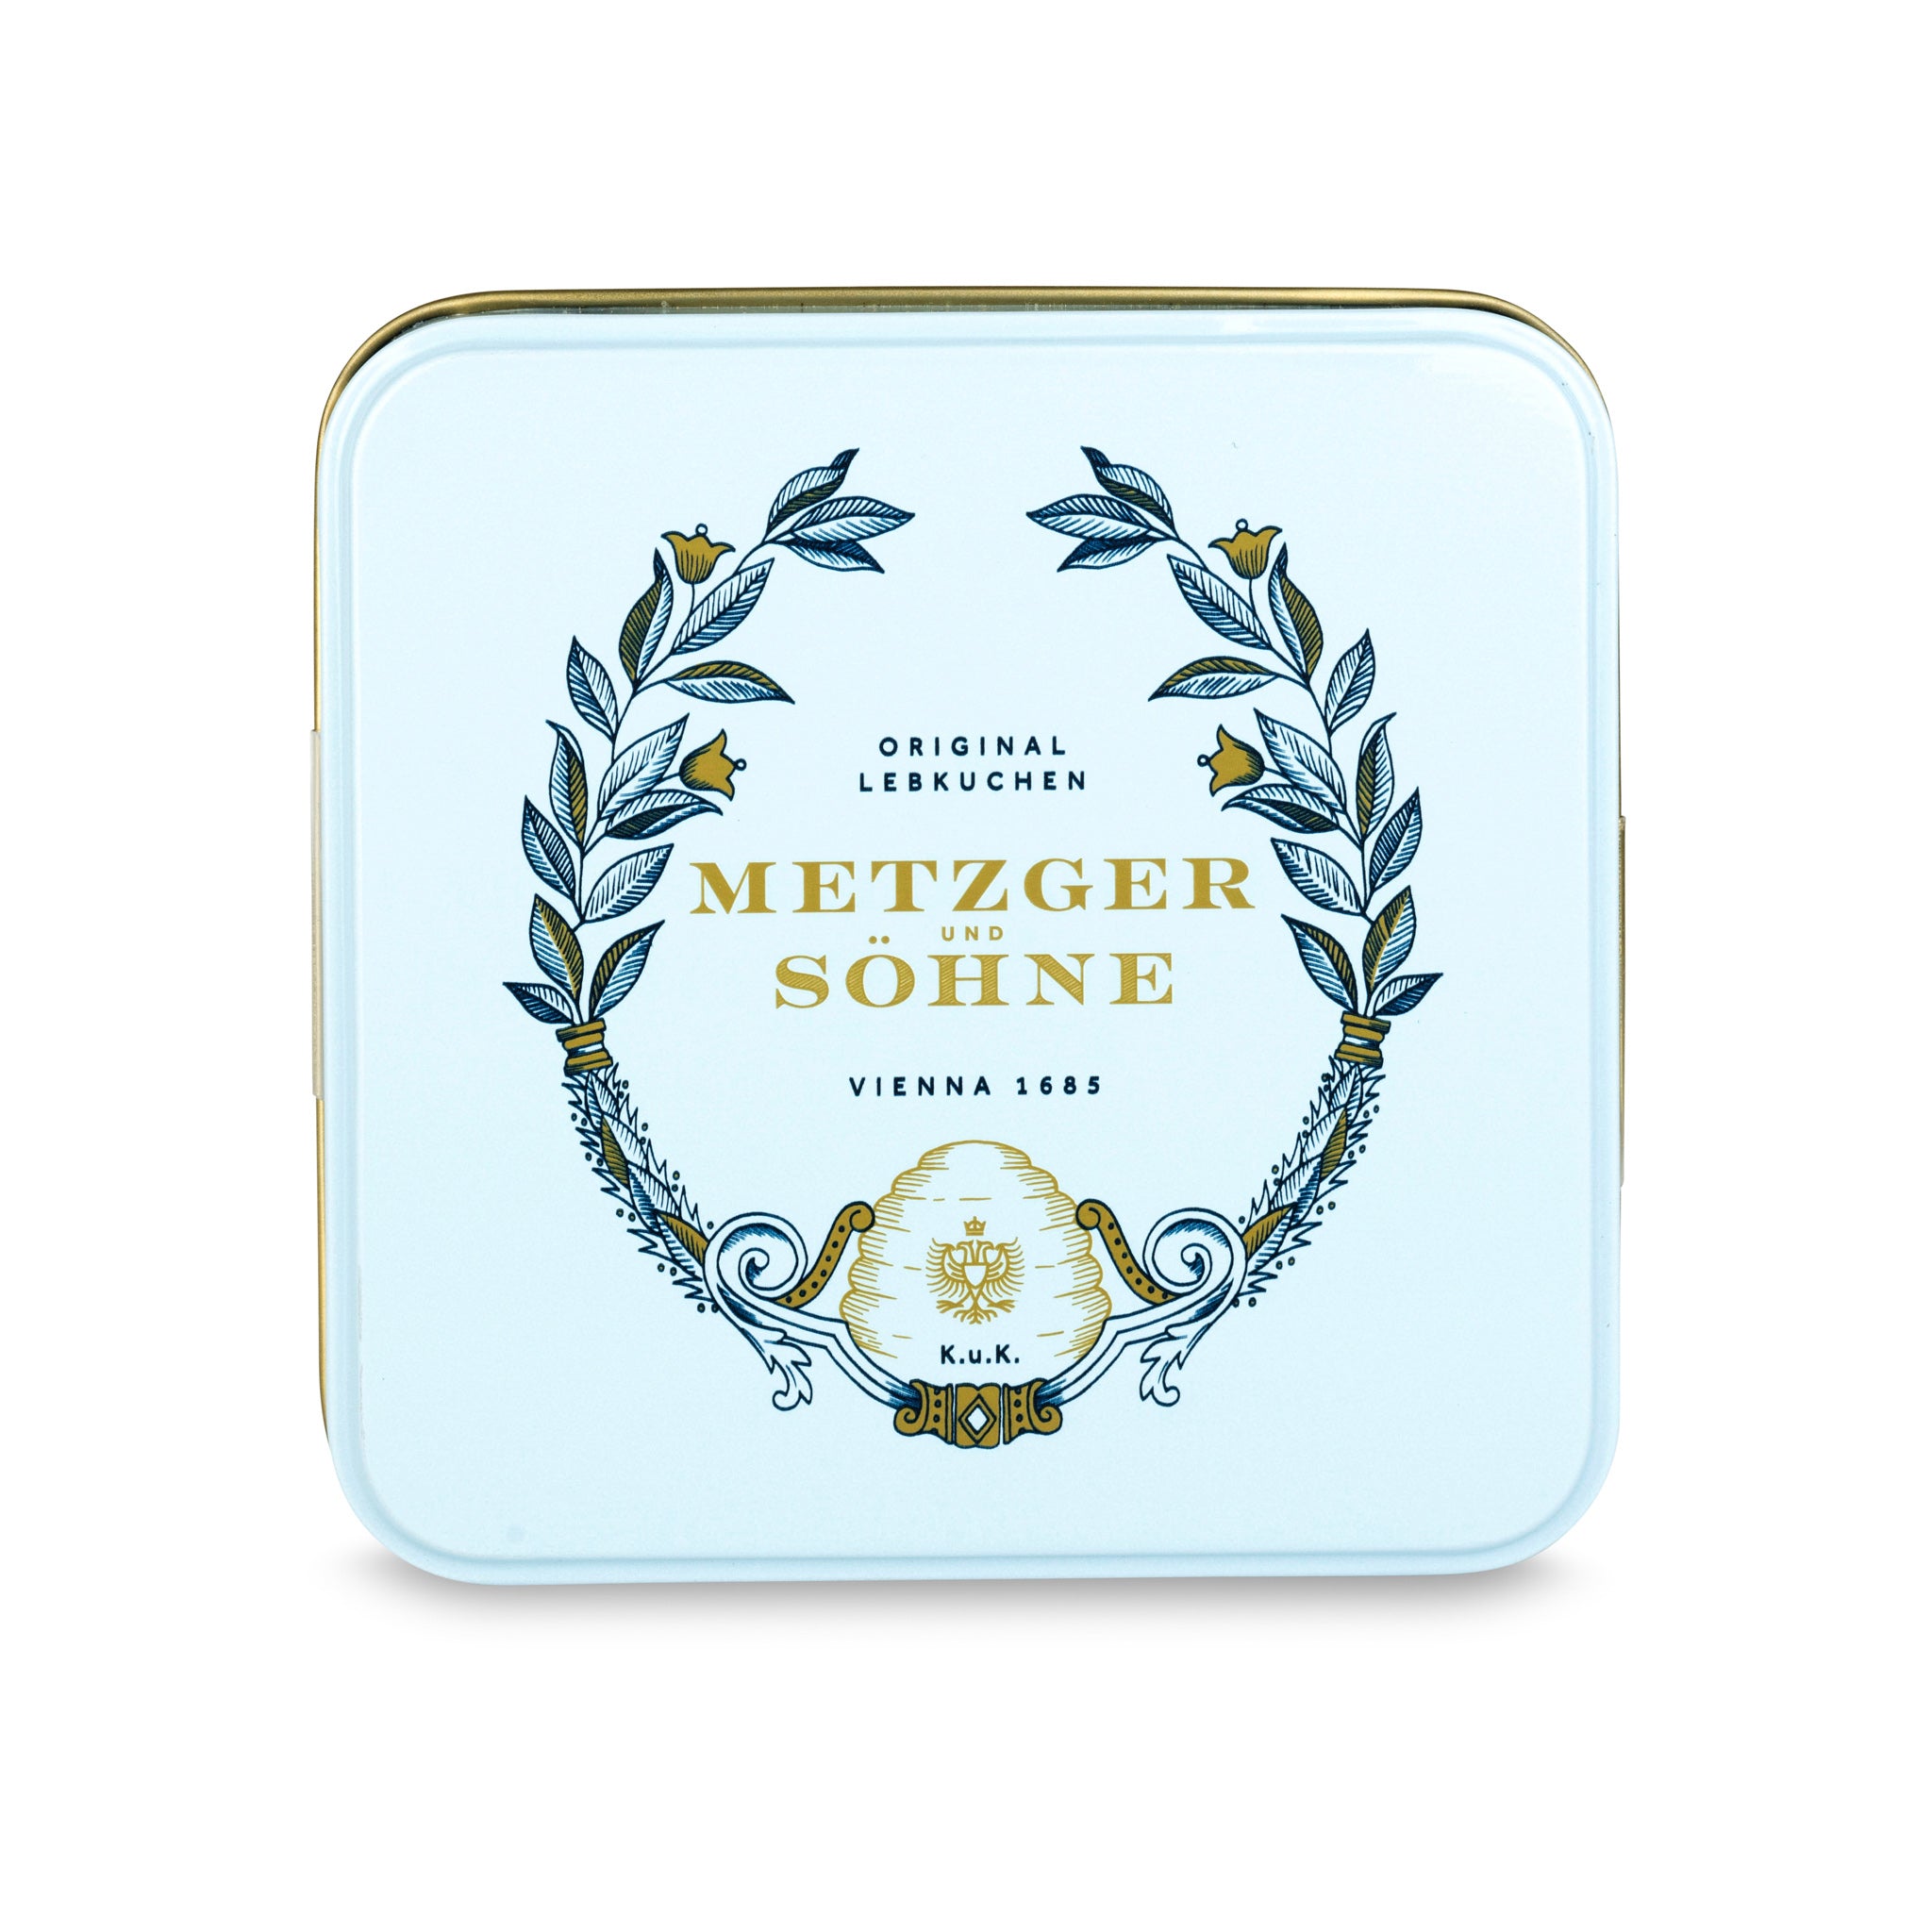 This small Metzger pralinetin in light blue impresses with a very high quality print and is filled with 9 different gingerbread pralines.